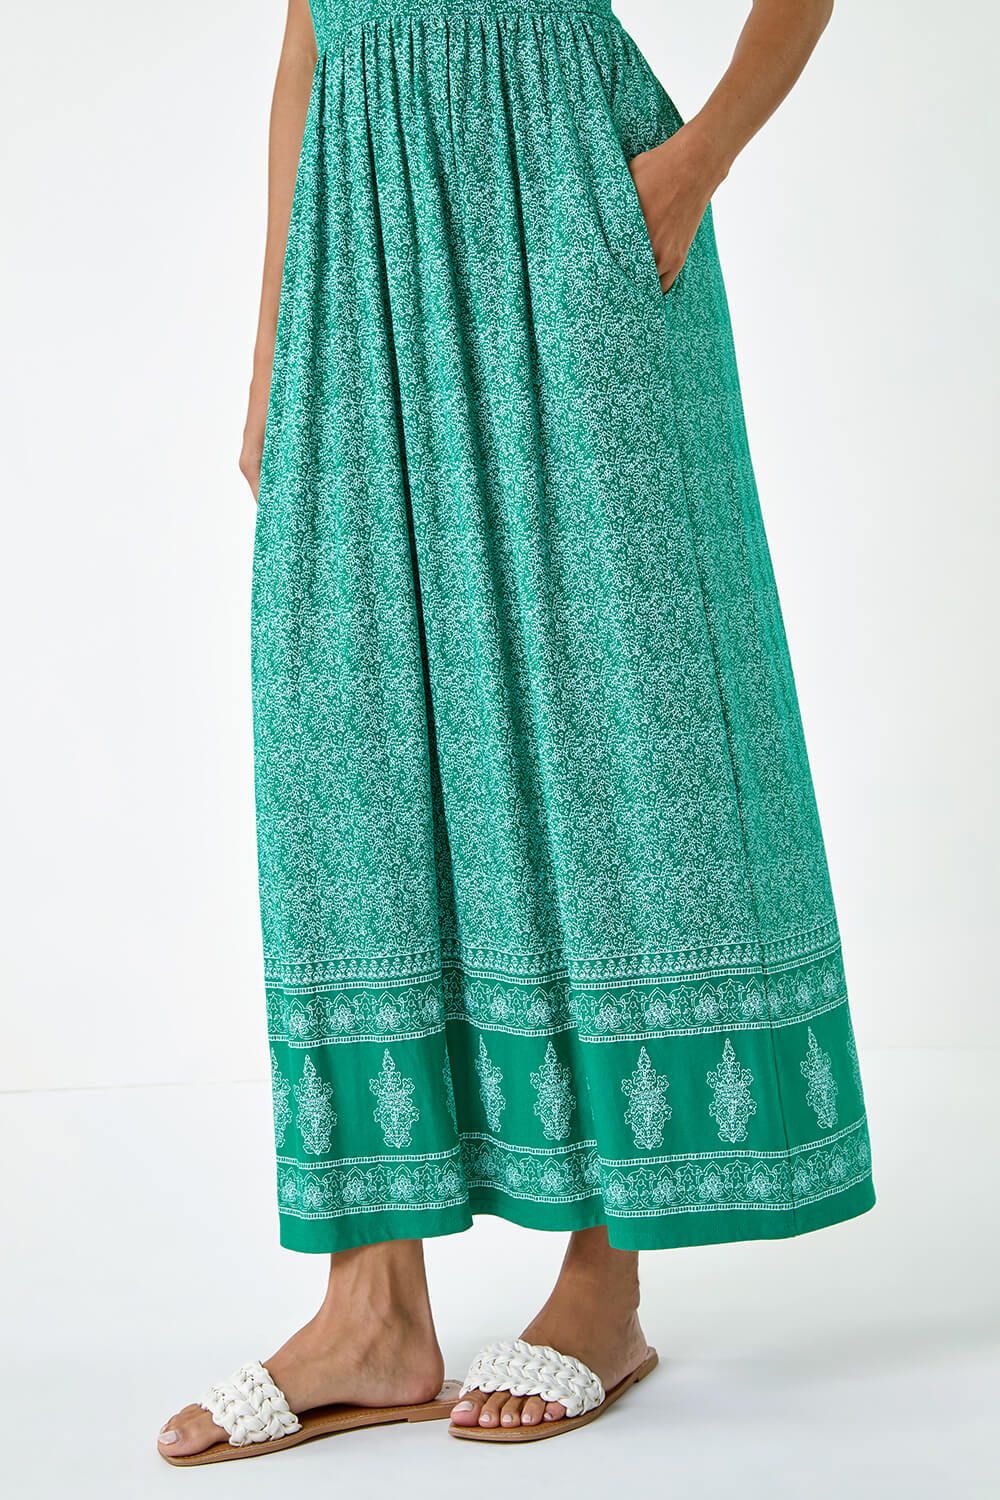 Green Paisley Relaxed Stretch Maxi Dress, Image 5 of 5